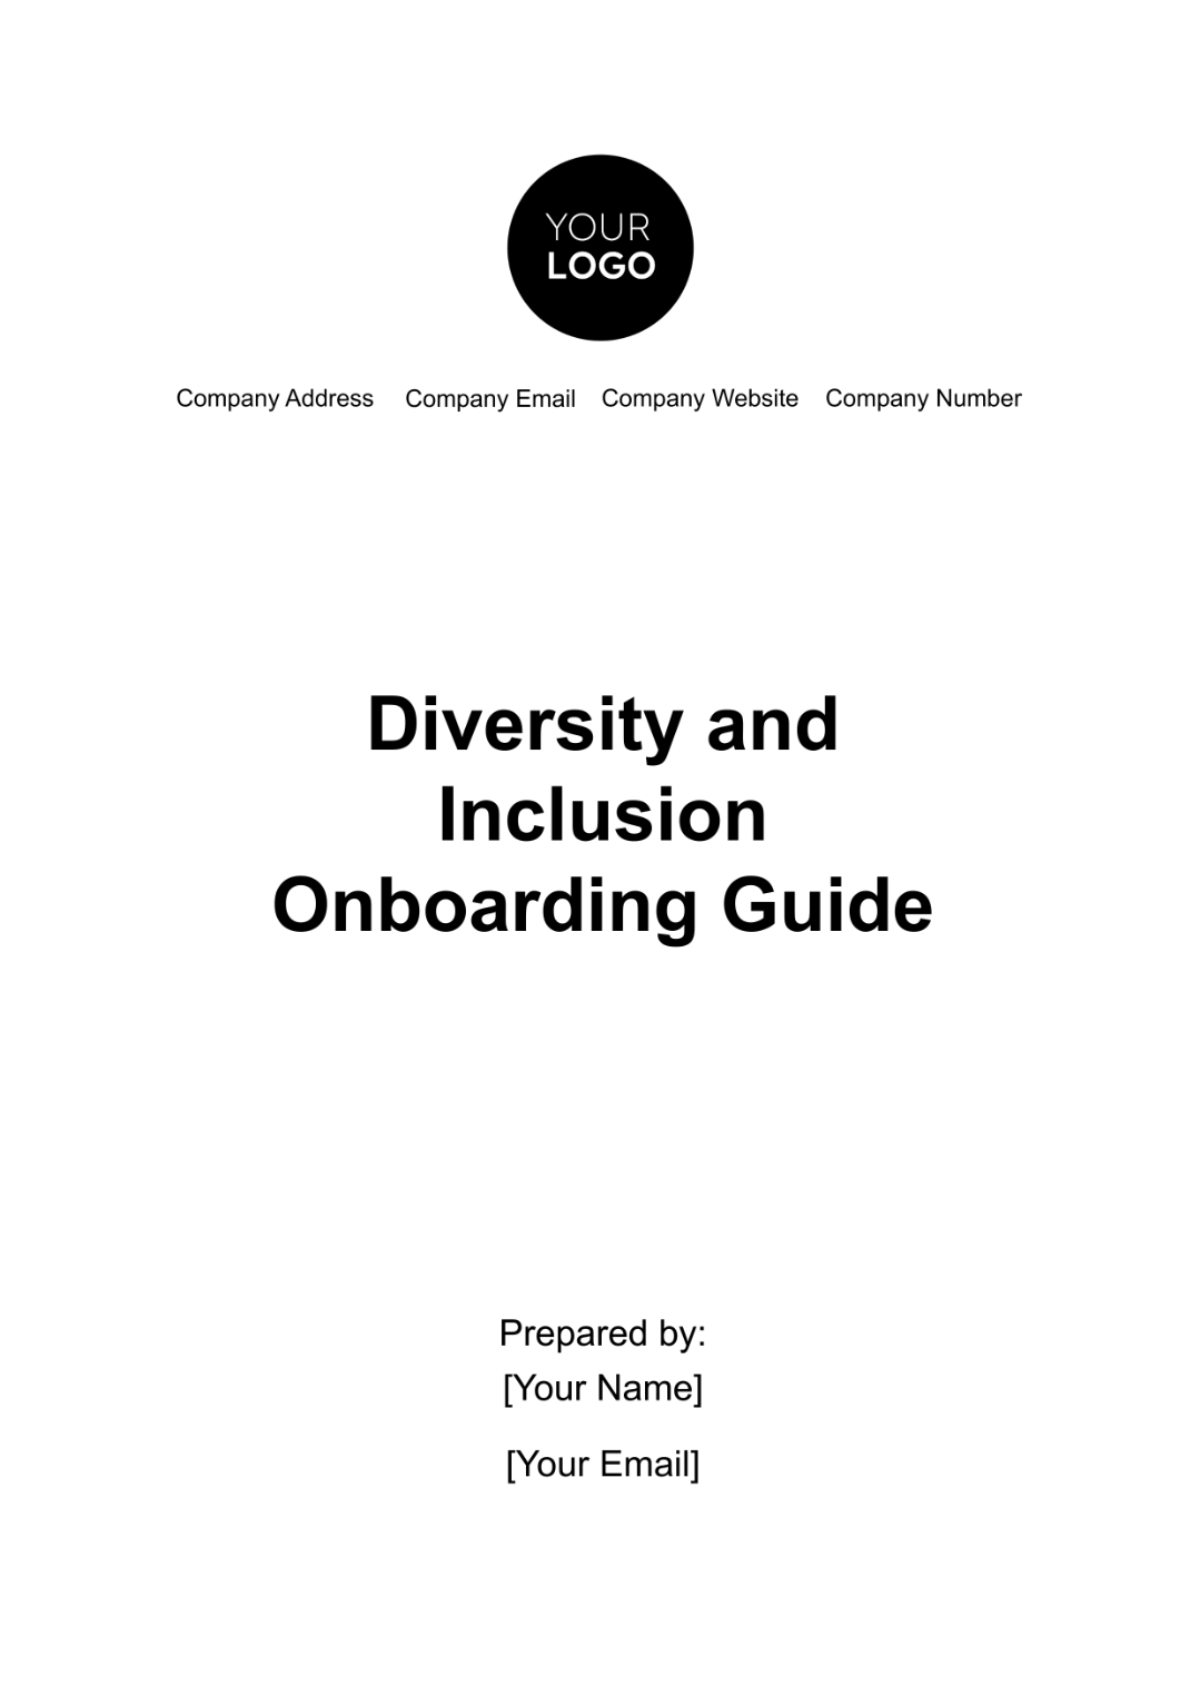 Free Diversity & Inclusion Onboarding Guide HR Template